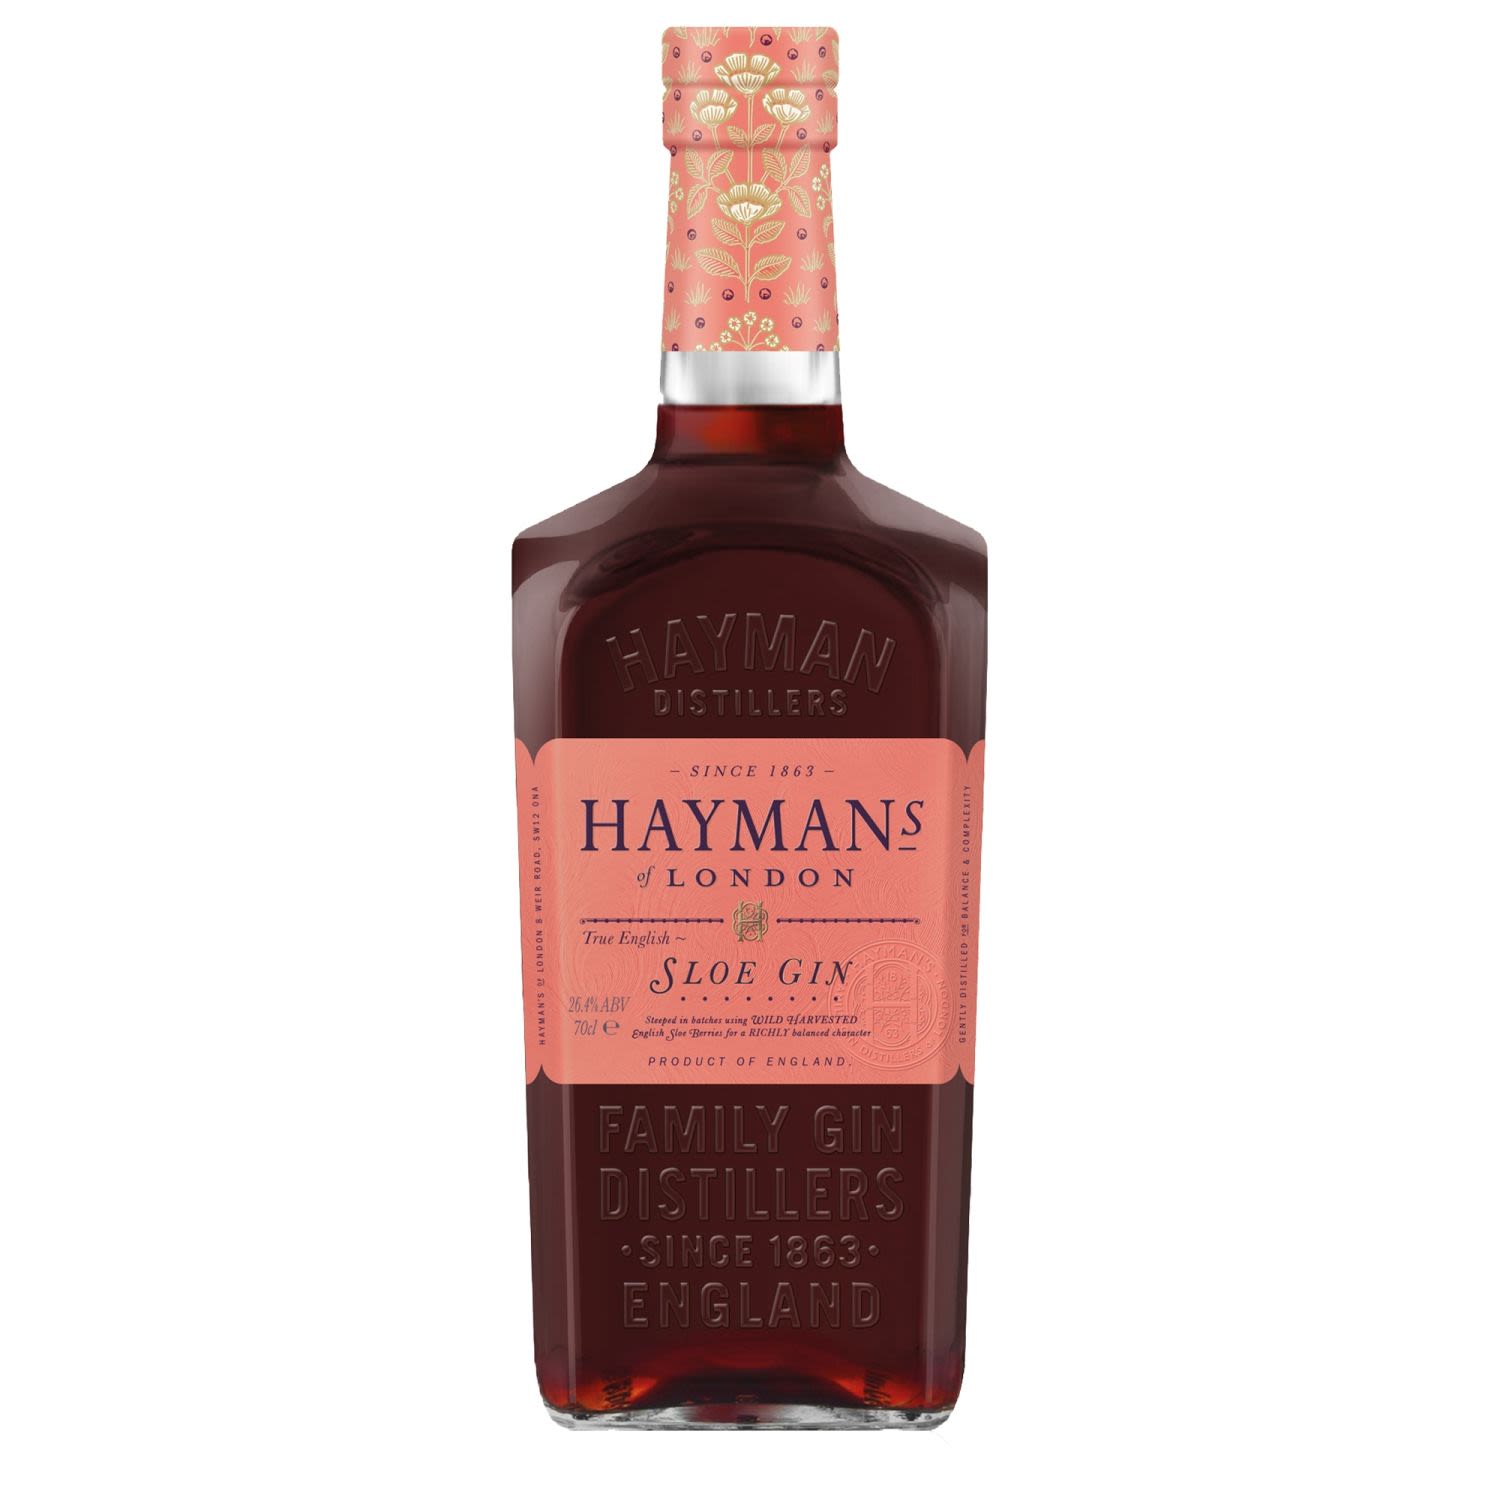 Hayman's Sloe Gin delivers bitter and sweet notes, complemented with a rich, sweet blackcurrant, fruity nose. Hayman's Sloe can enjoyed on its own, over ice or in a long drink.<br /> <br />Alcohol Volume: 26.00%<br /><br />Pack Format: Bottle<br /><br />Standard Drinks: 14.4</br /><br />Pack Type: Bottle<br /><br />Country of Origin: England<br />